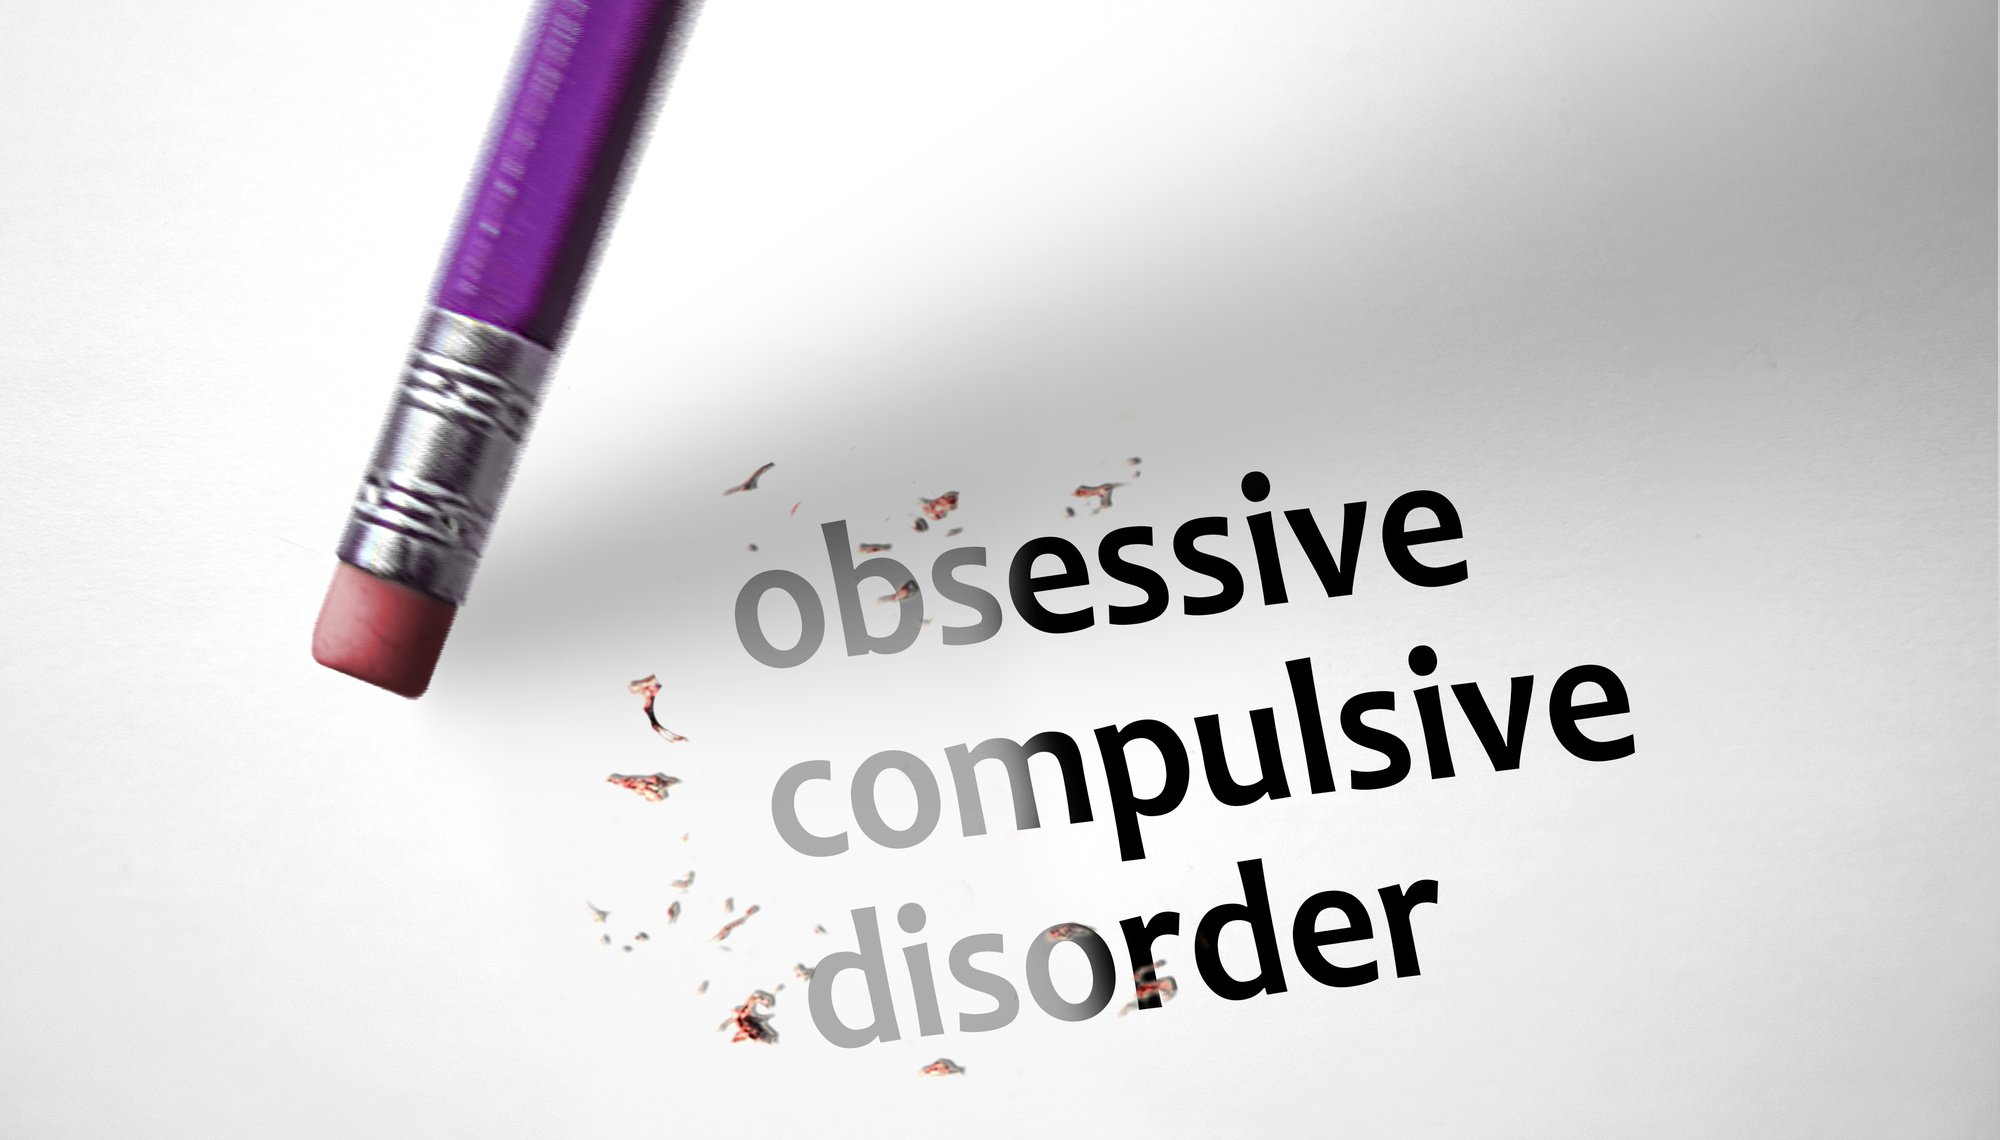 Are you familiar with the four stages of the OCD cycle? You can read about them in this overview and learn about coping strategies.